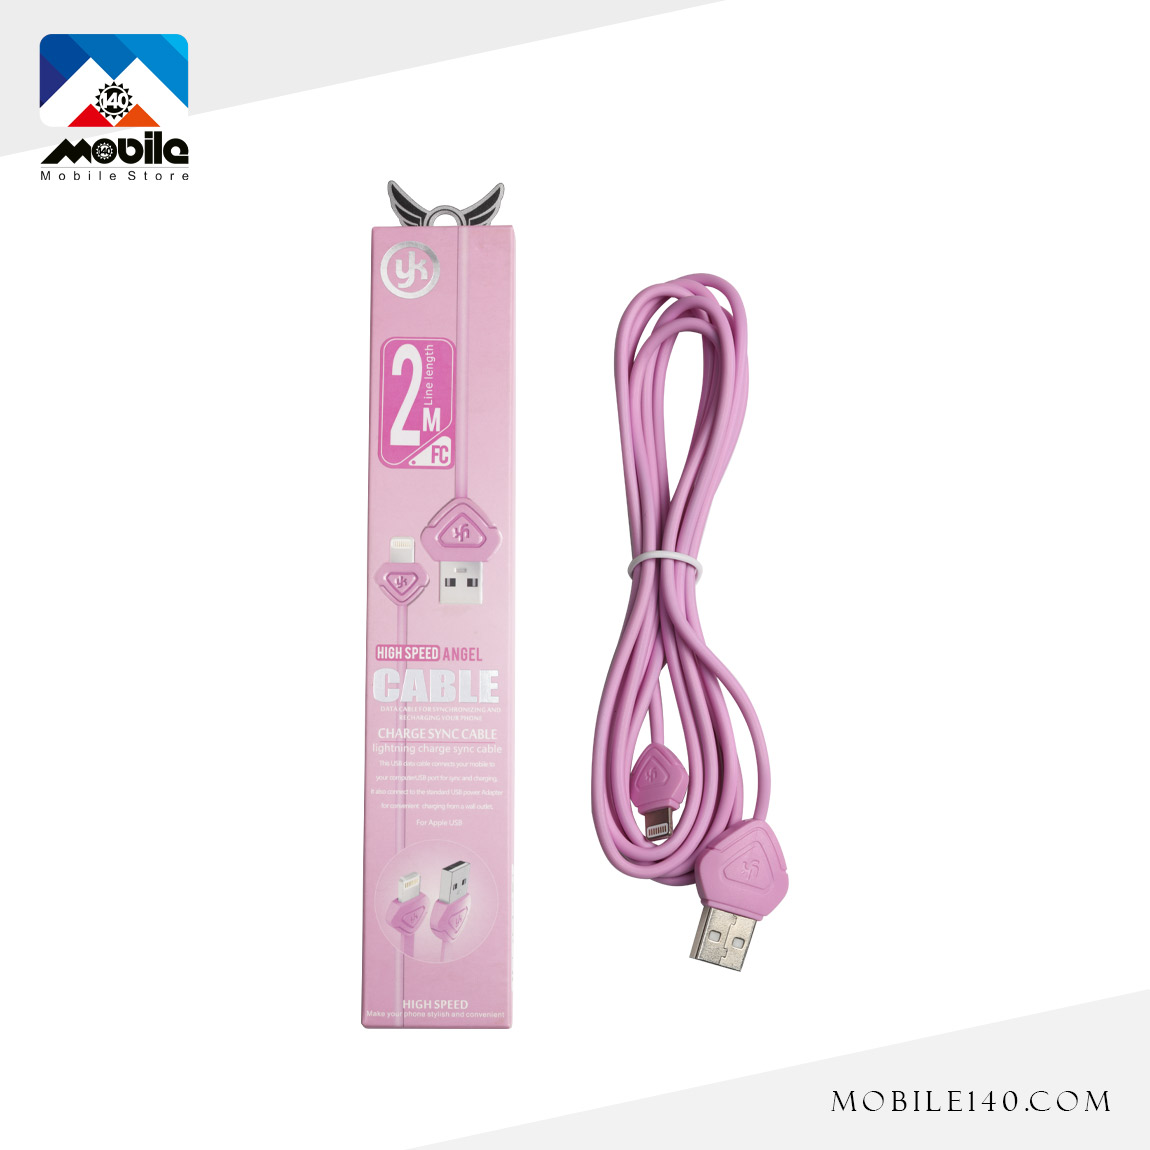 Ykaromise High Speed Cable Model Angel 1